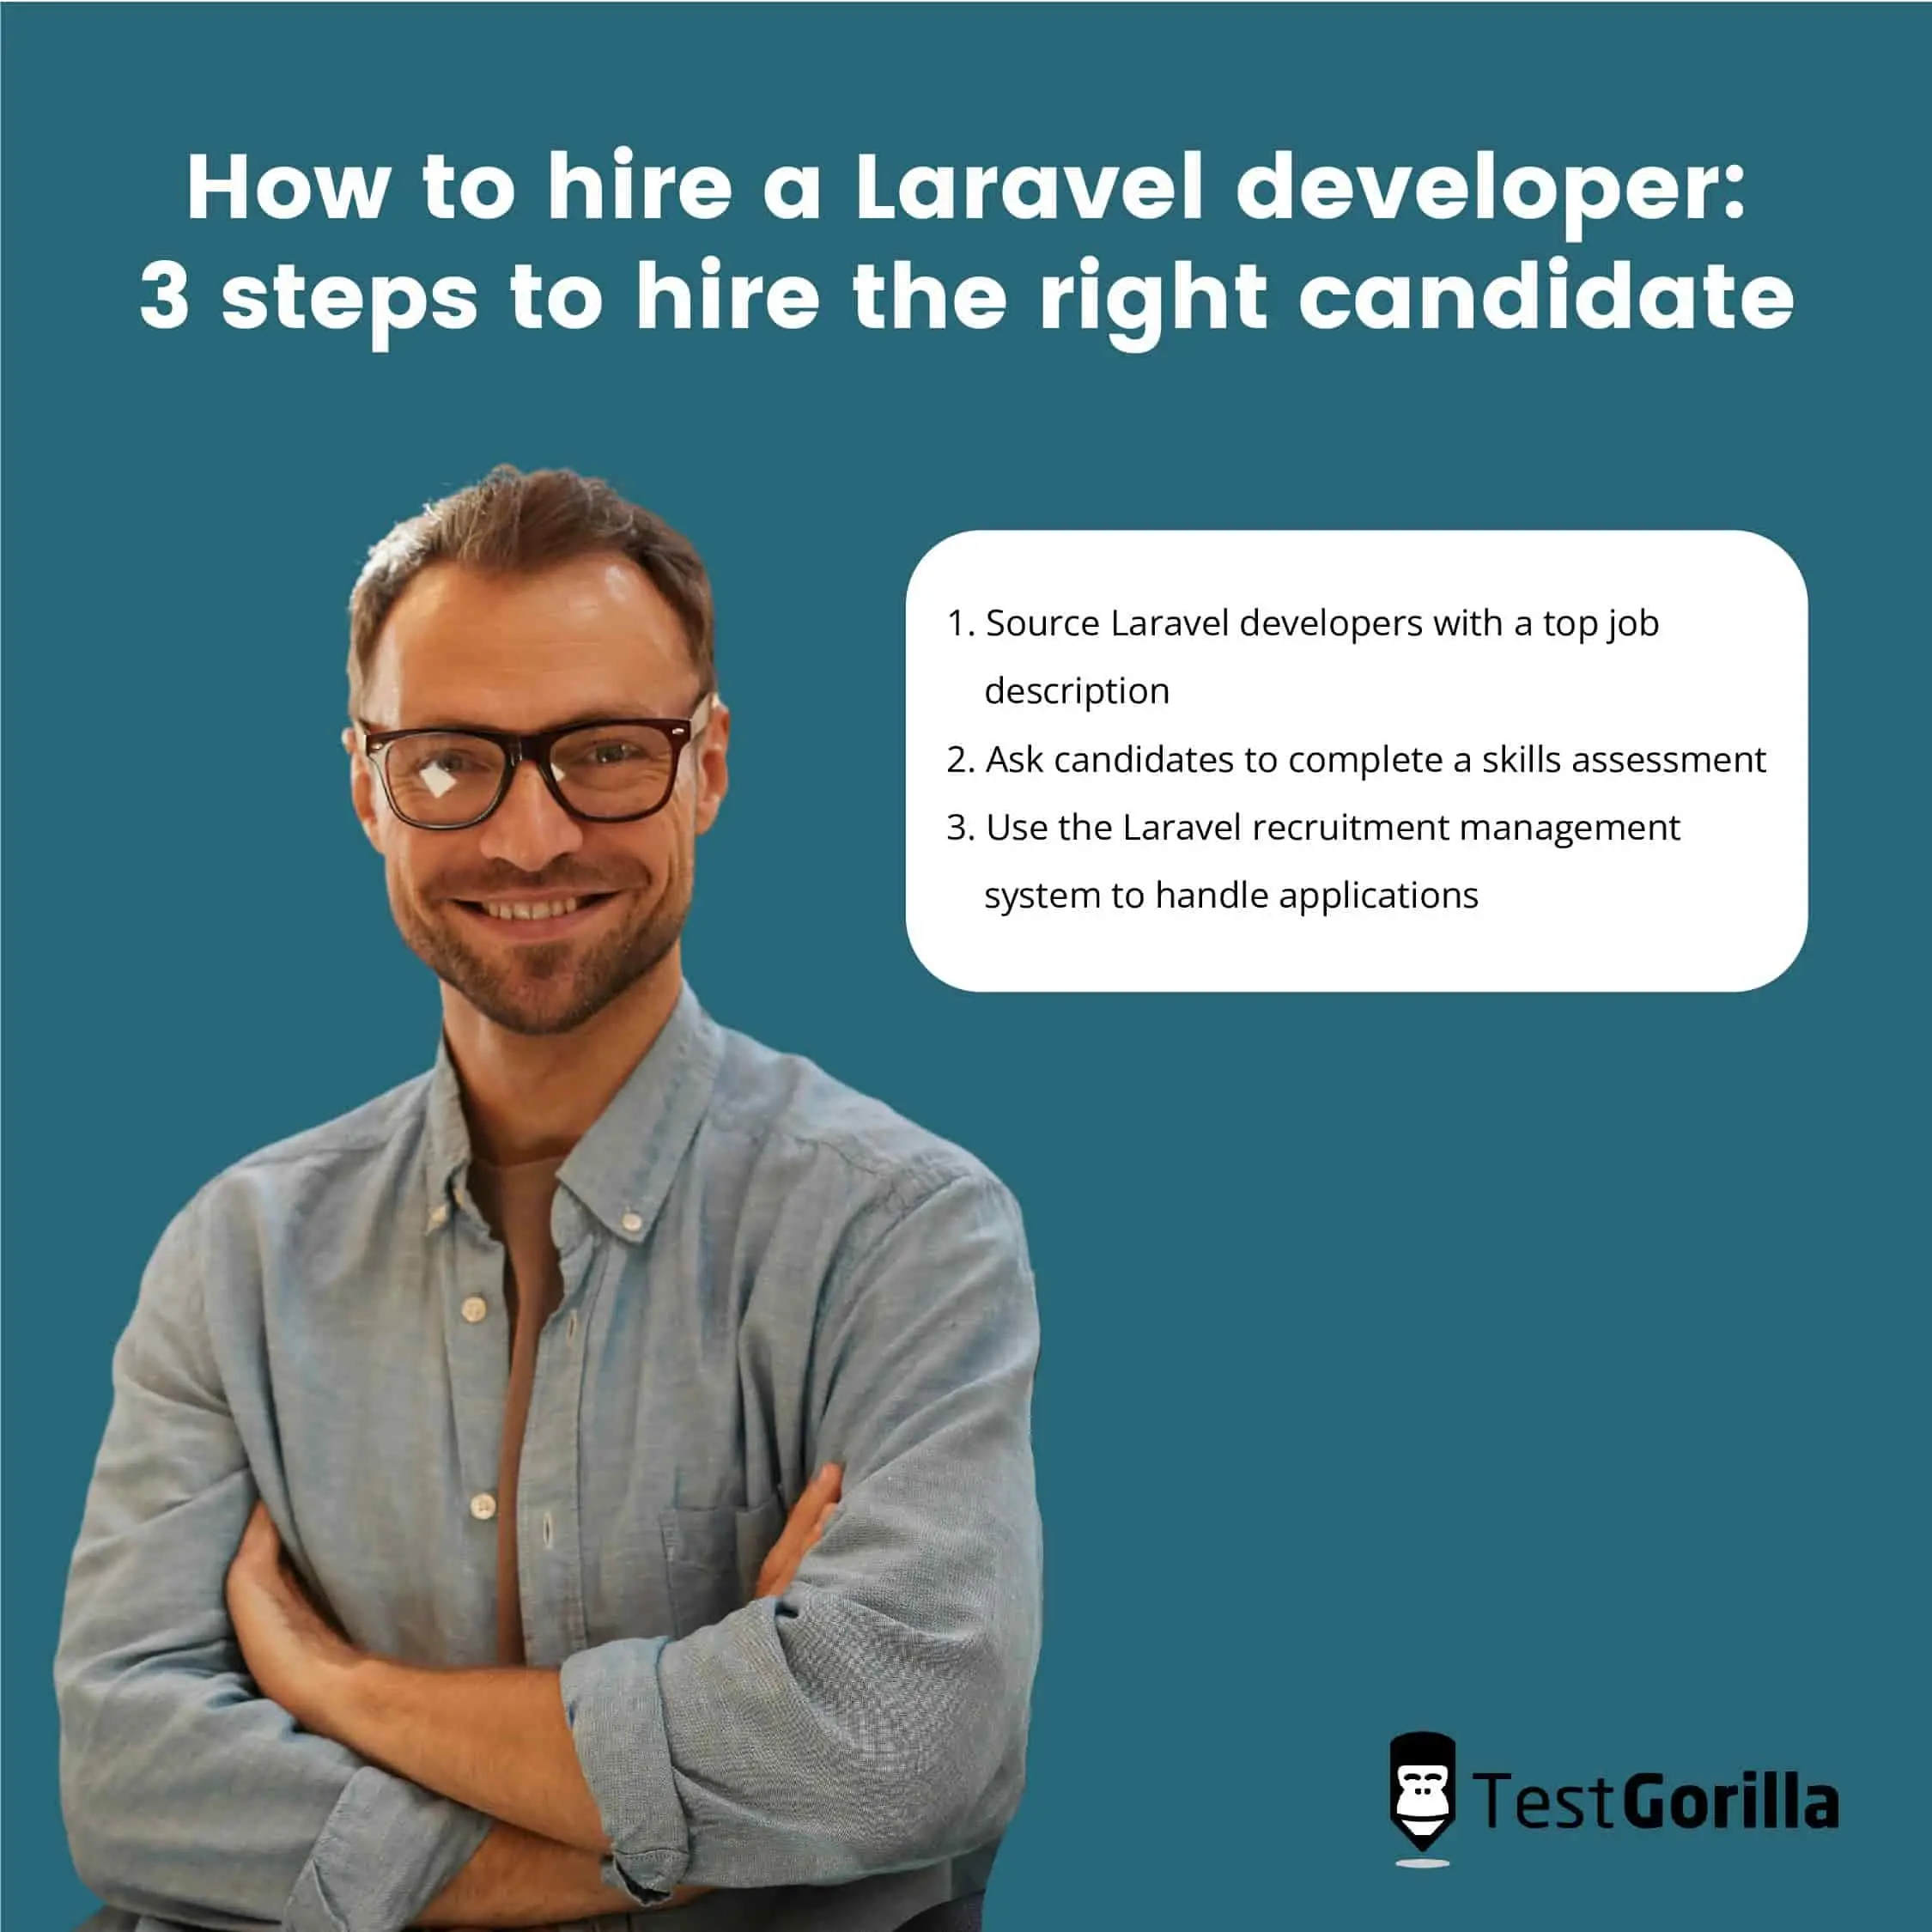 list of 3 steps to hire the right candidate